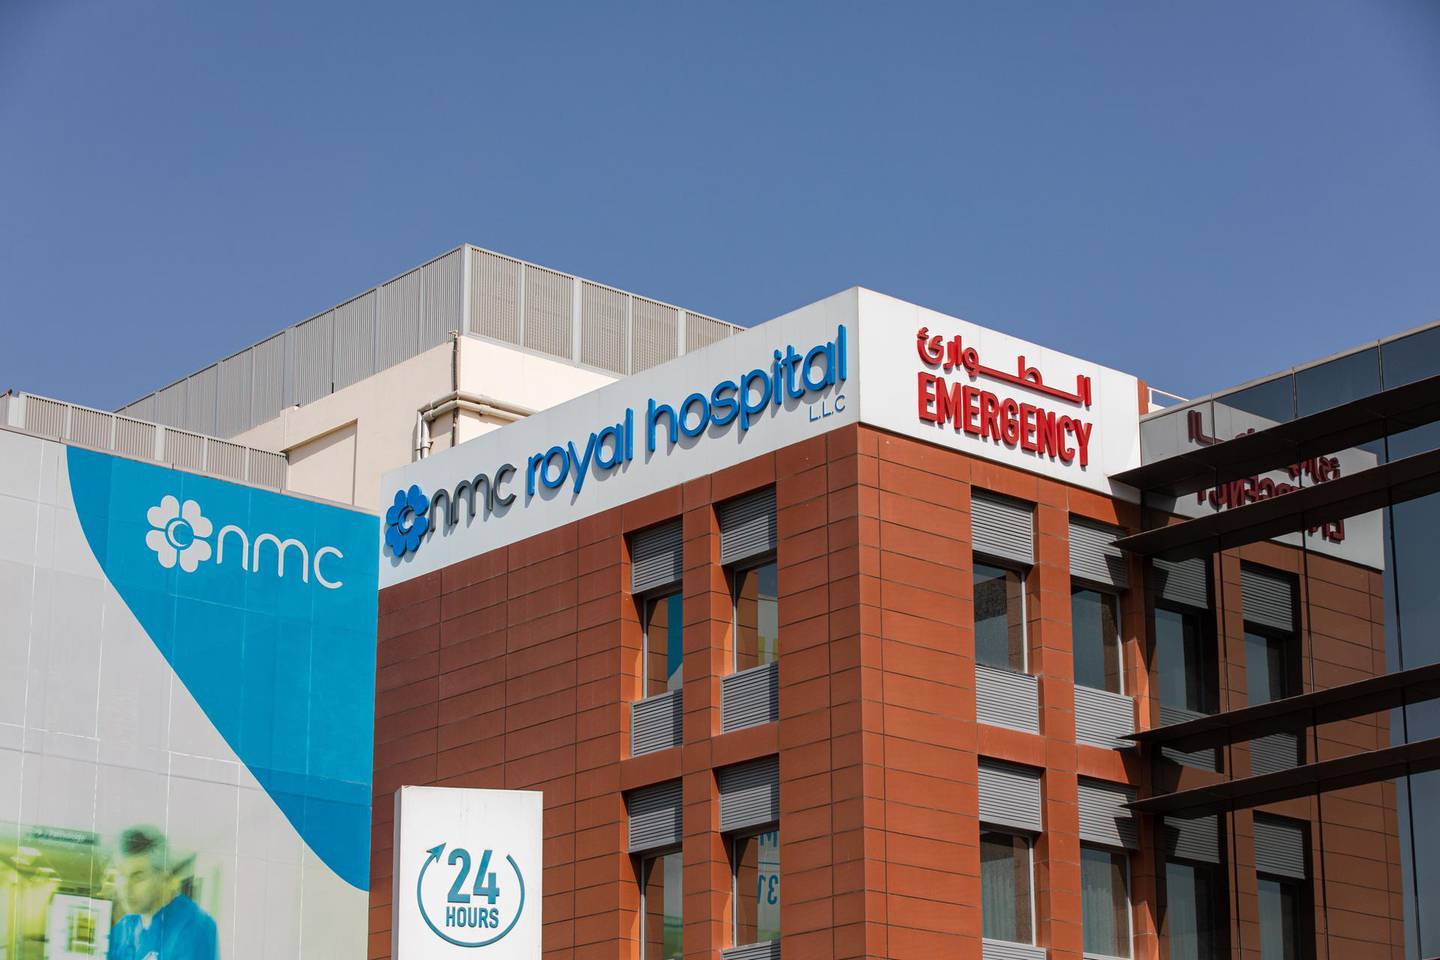 An emergency department sign sits on display outside the NMC Royal Hospital, operated by NMC Health Plc, in Abu Dhabi, United Arab Emirates, on Sunday, March 1, 2020. Troubled NMC Health Plc, the largest private health-care provider in the United Arab Emirates, asked lenders for an informal standstill on its debt as Abu Dhabi weighs an injection of capital to safeguard the emirate’s reputation among global investors. Photographer: Christopher Pike/Bloomberg